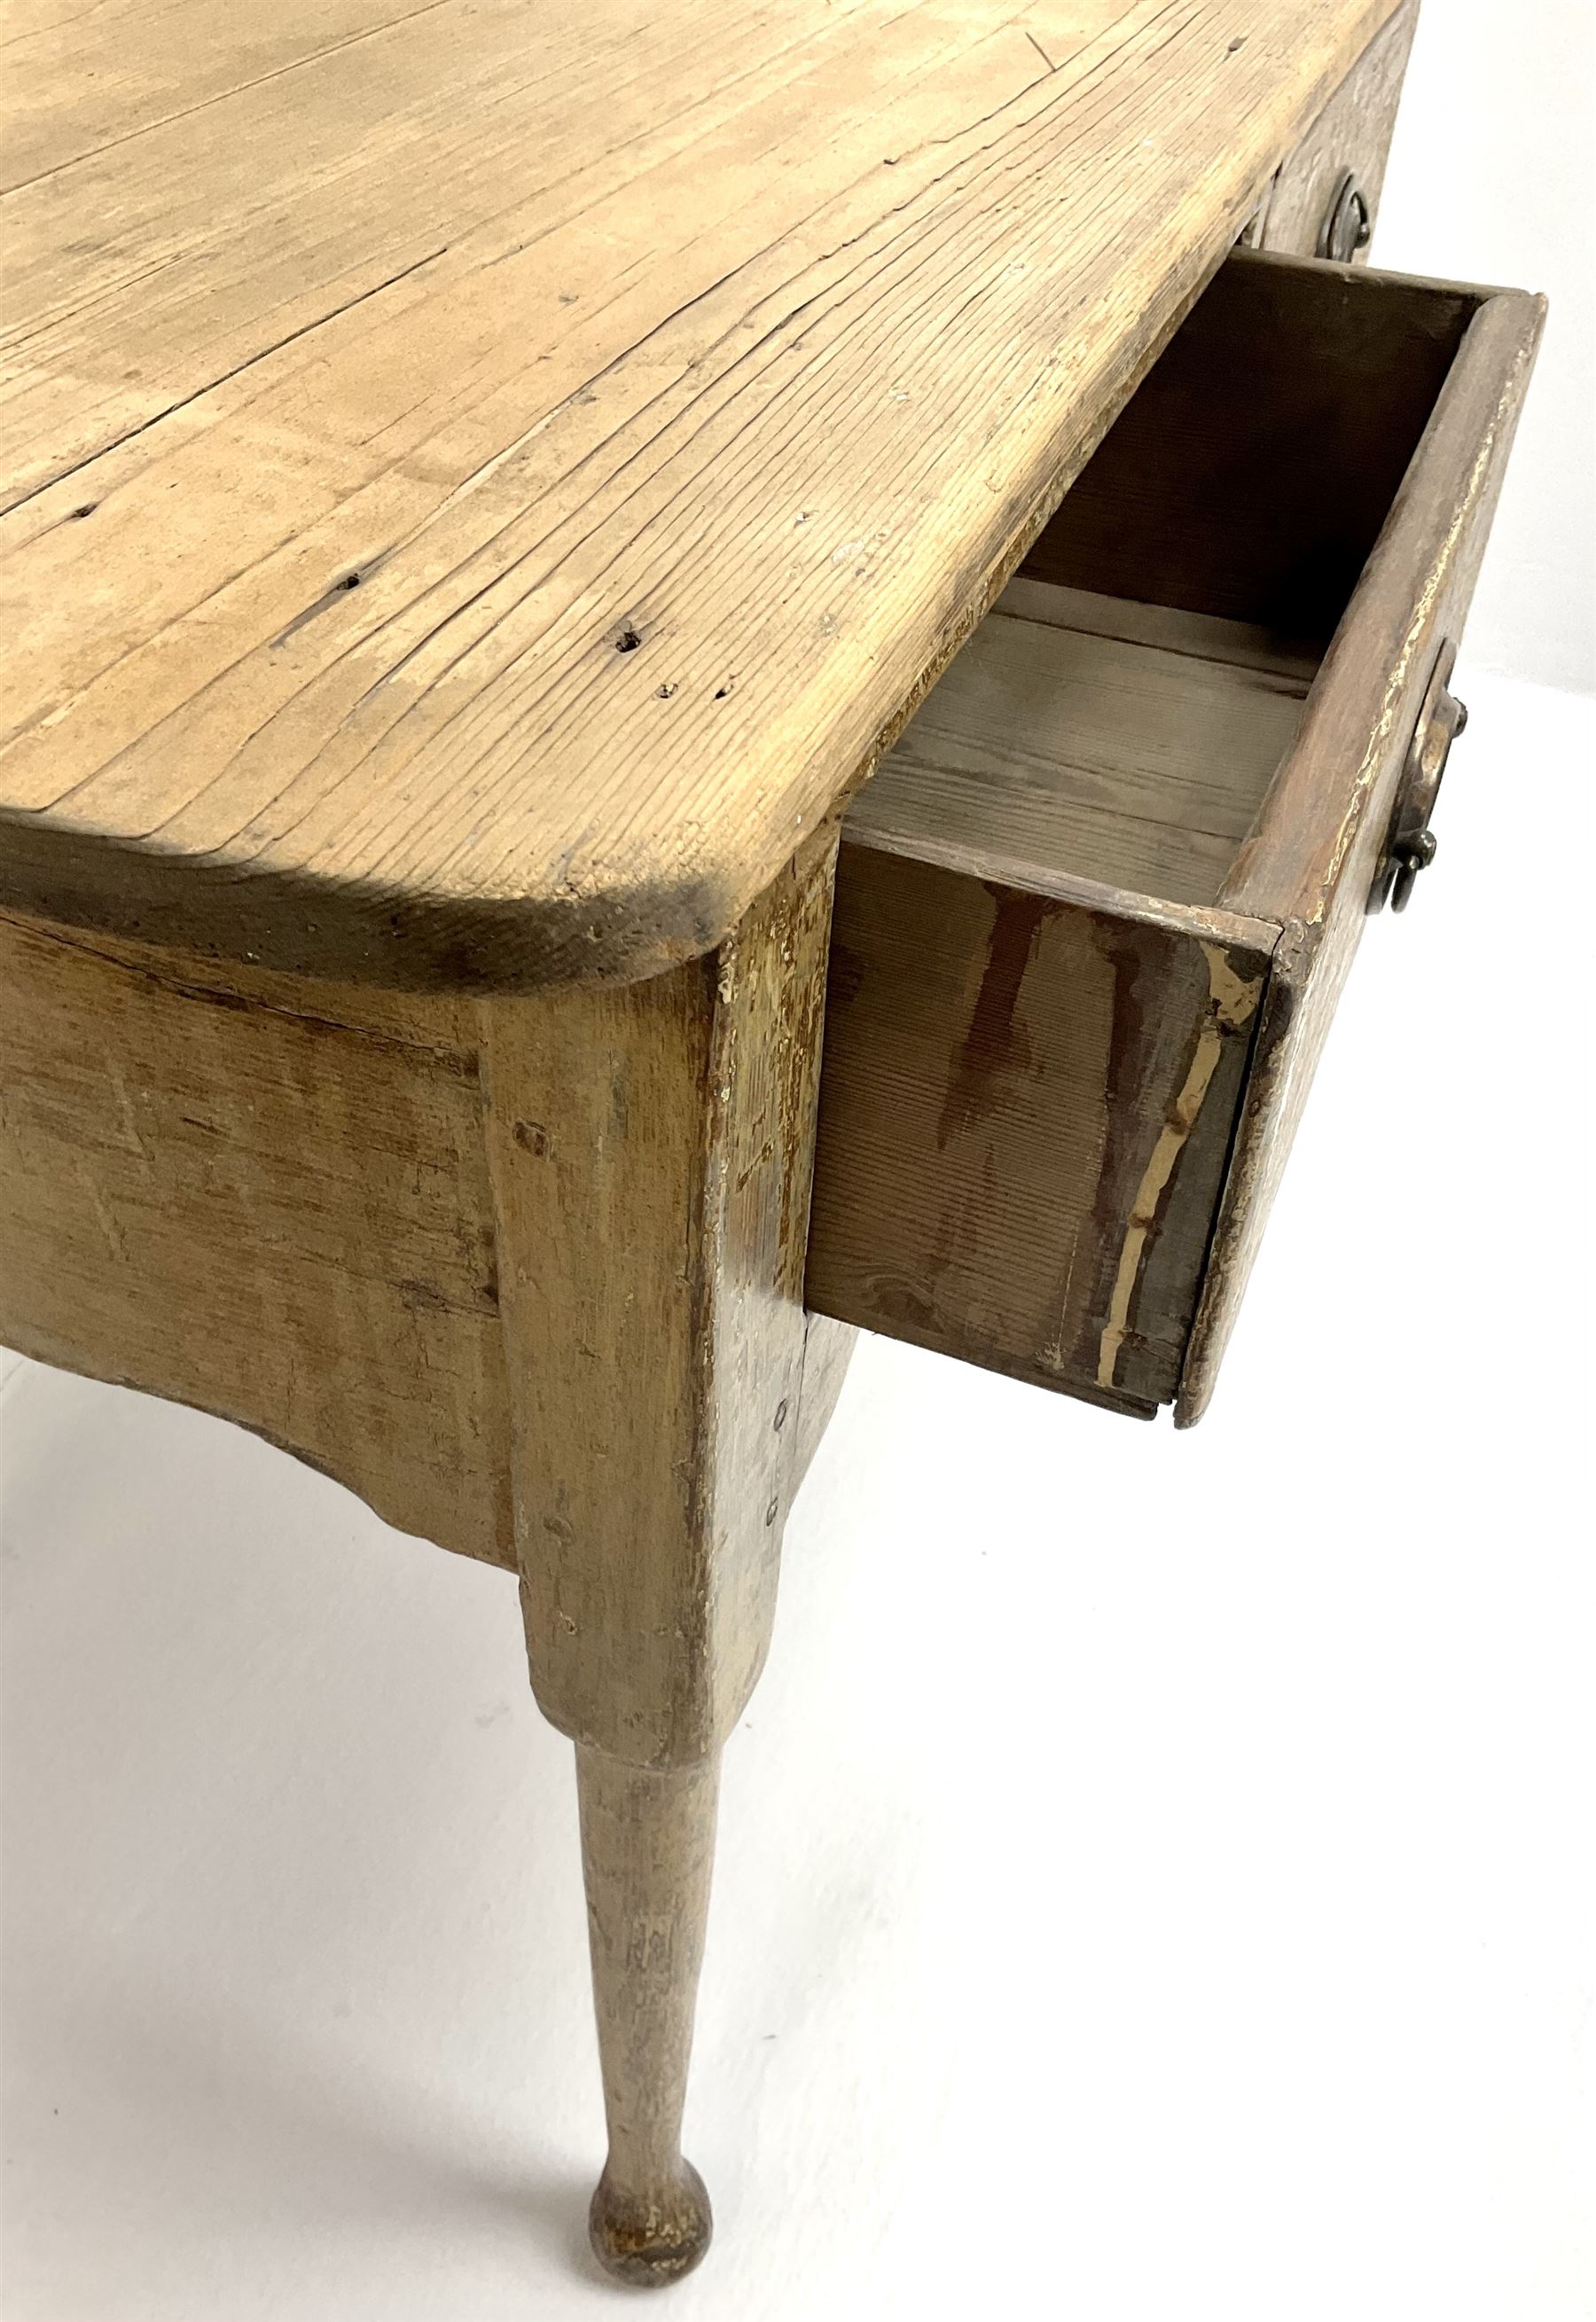 19th century pine side table - Image 3 of 3